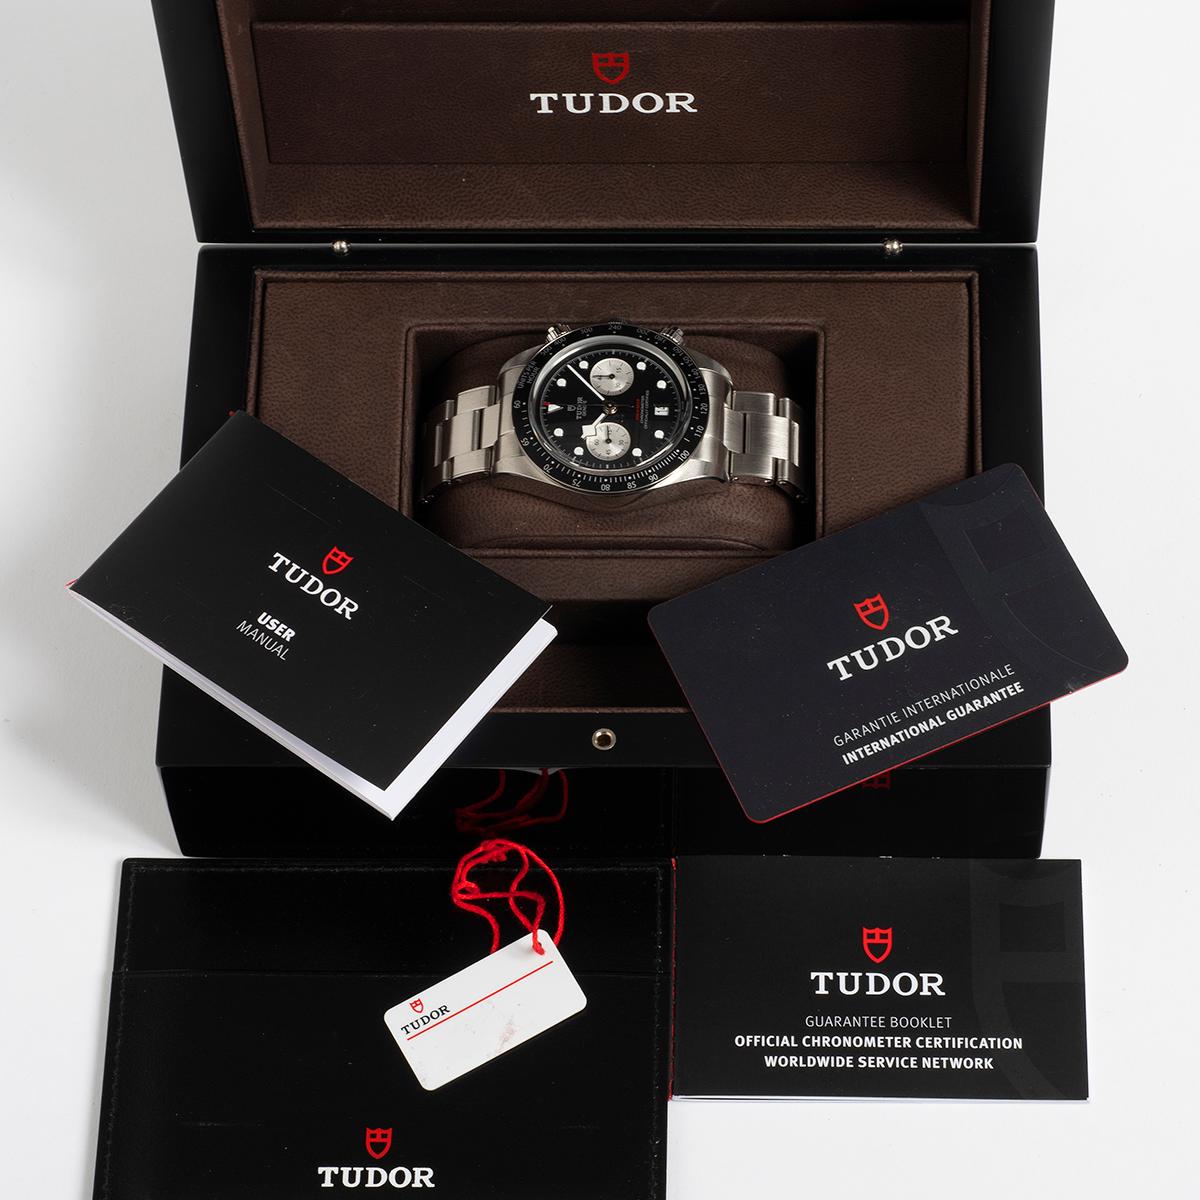 Our Tudor Black Bay Chronograph reference 79360N, with black panda dial and date features a 41mm stainless steel case and stainless steel bracelet, presented in excellent condition with only light signs of use overall. The clasp stickers are